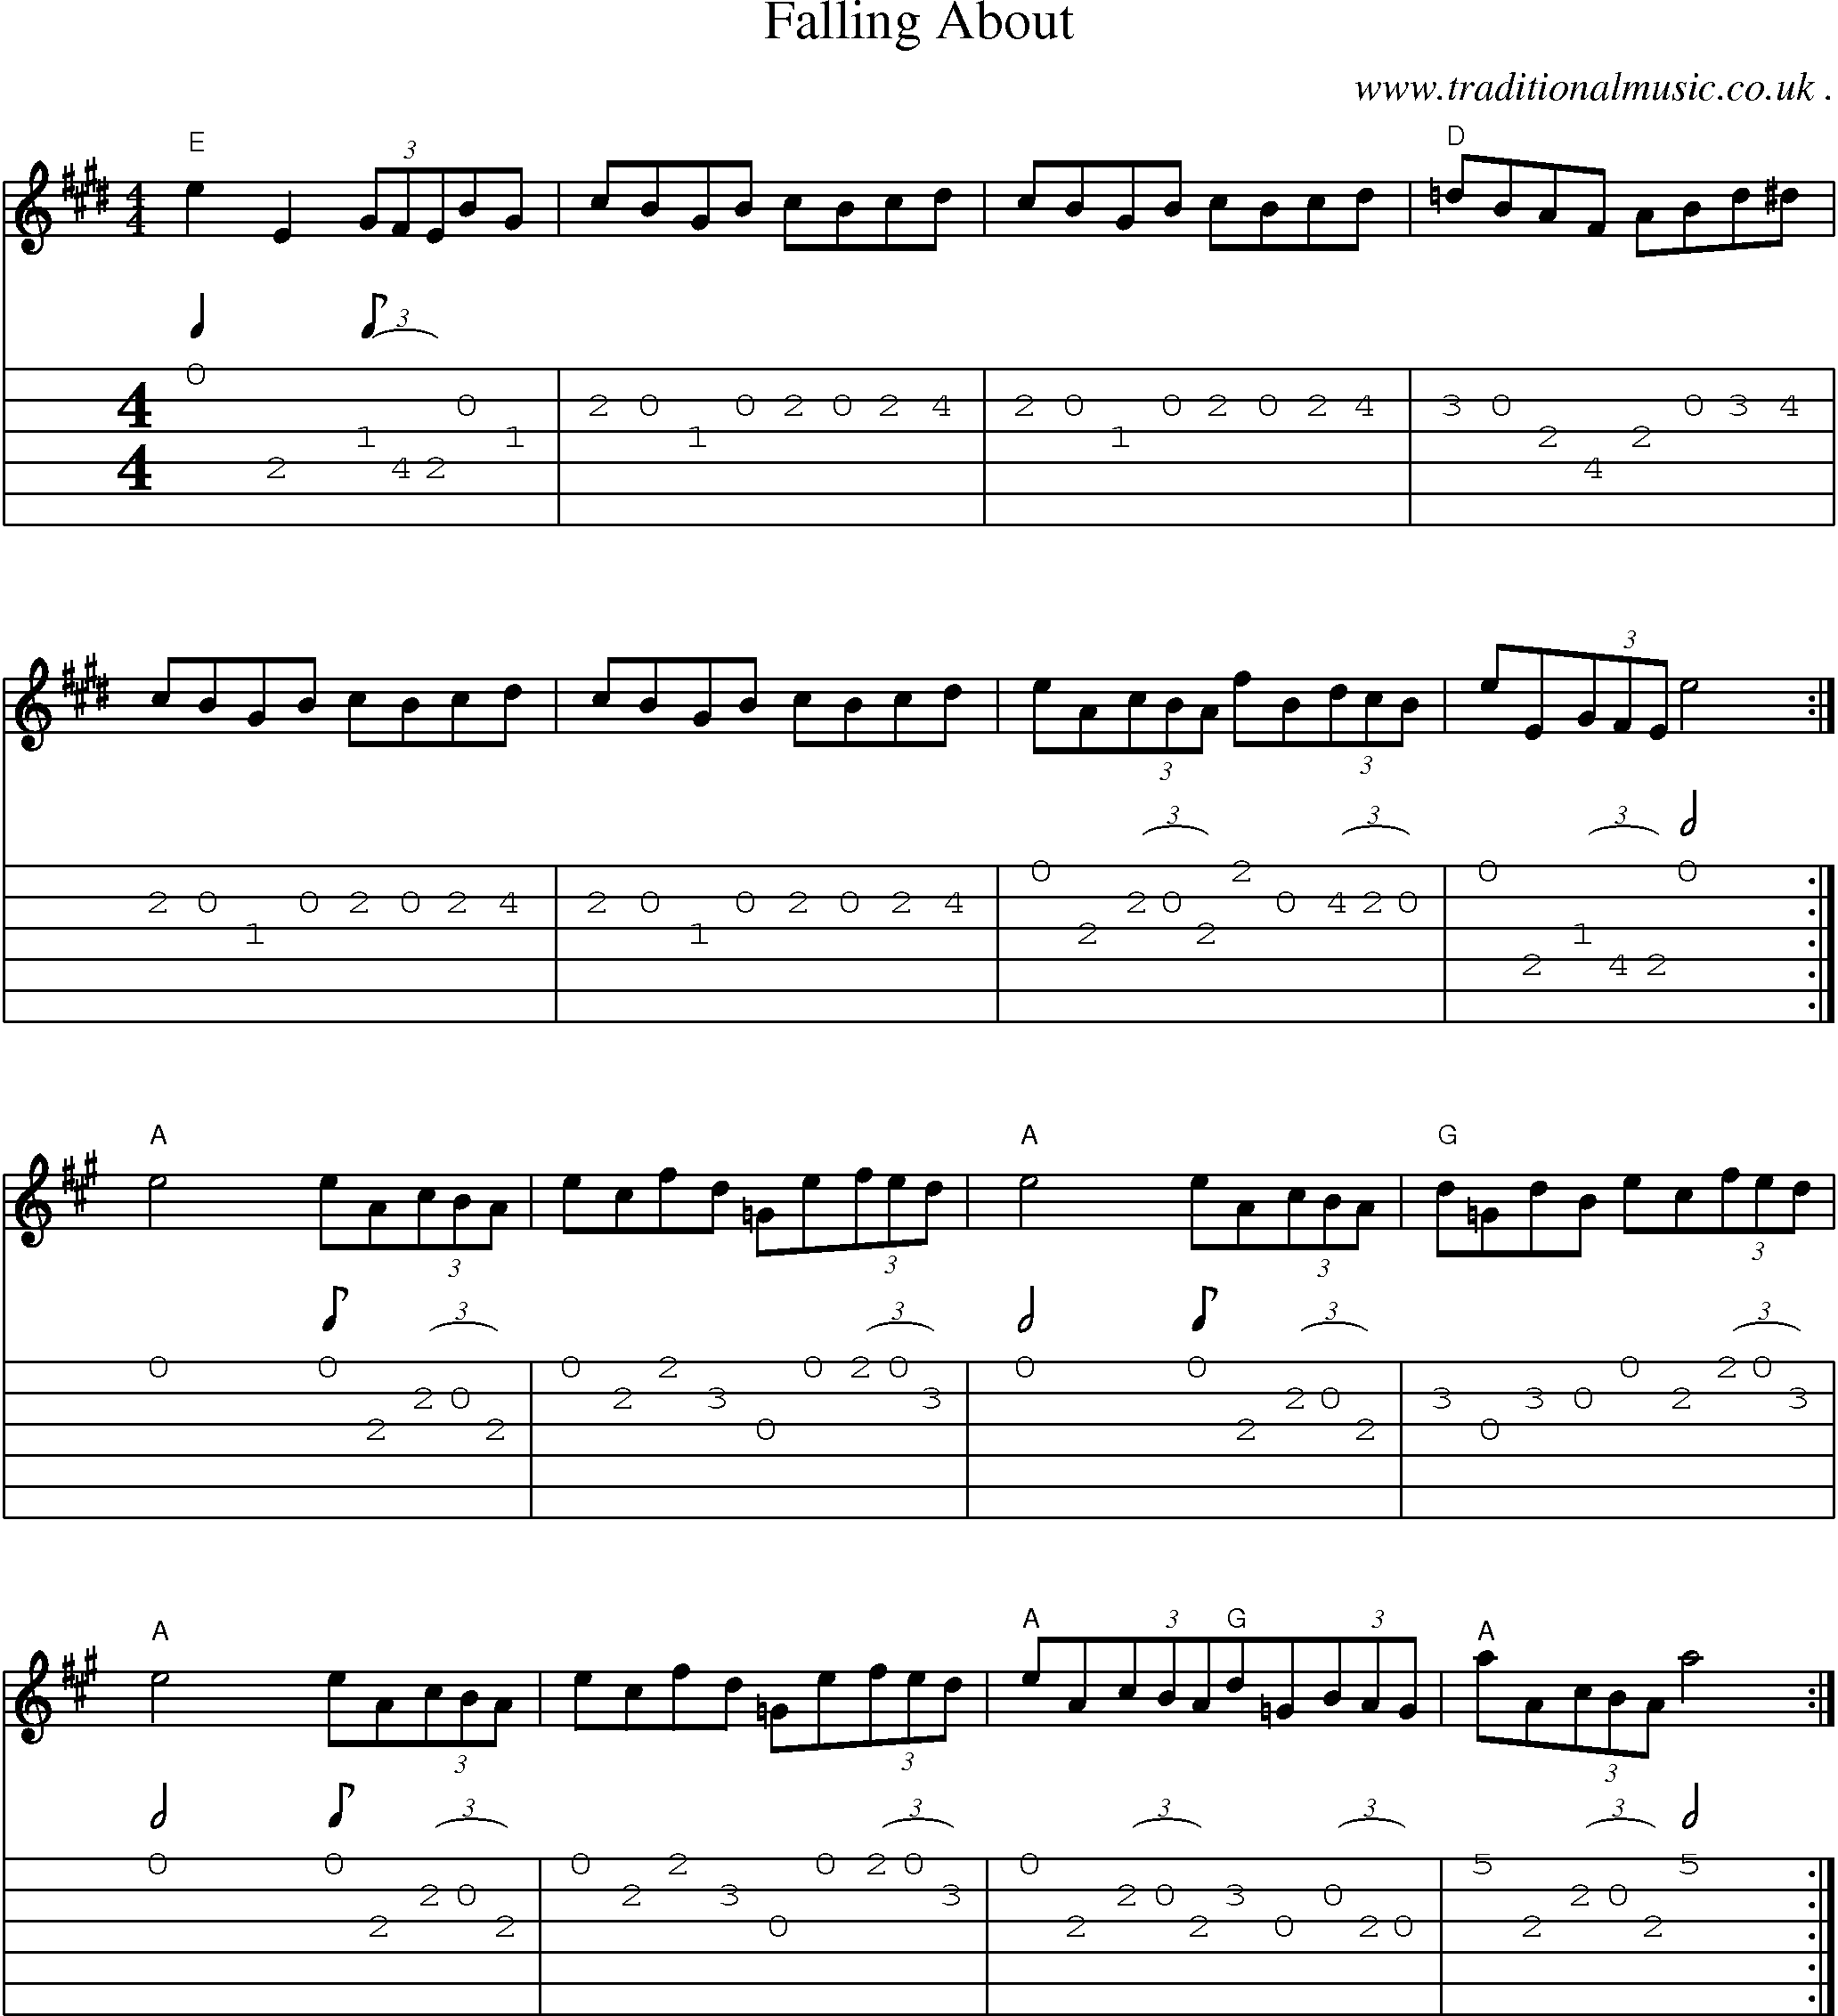 Sheet-Music and Guitar Tabs for Falling About